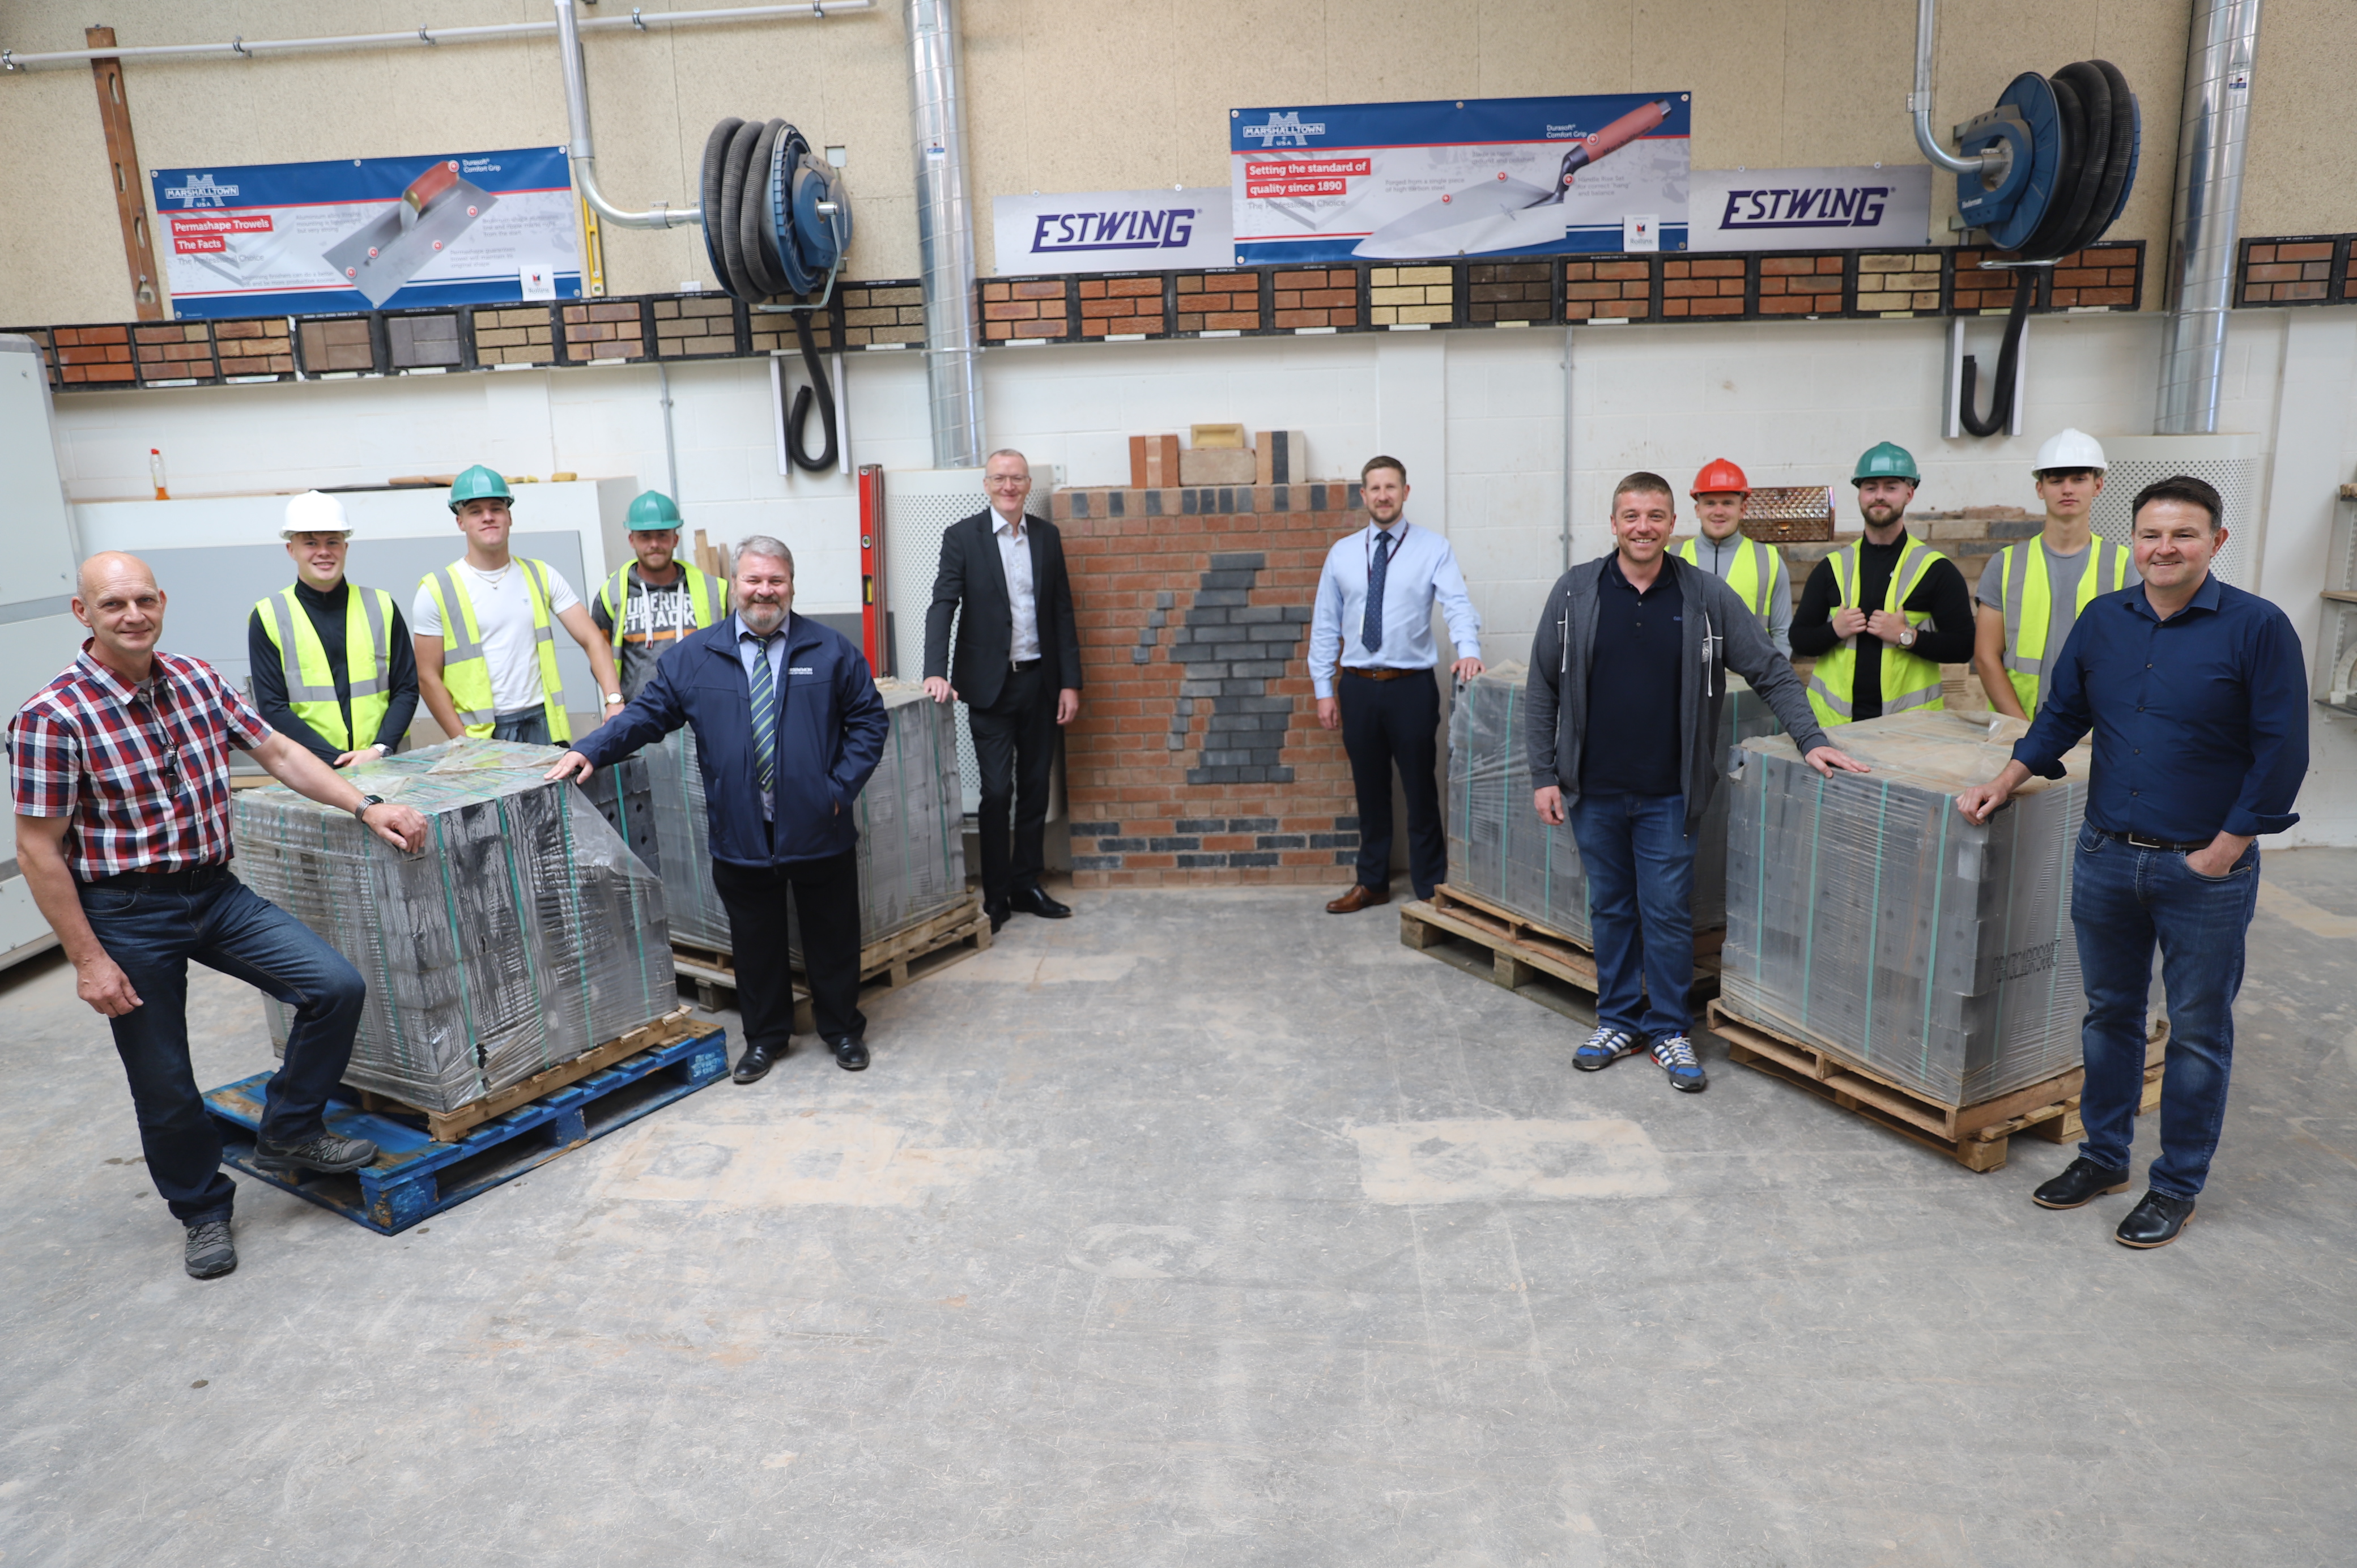 Persimmon Homes donates materials to Forth Valley College